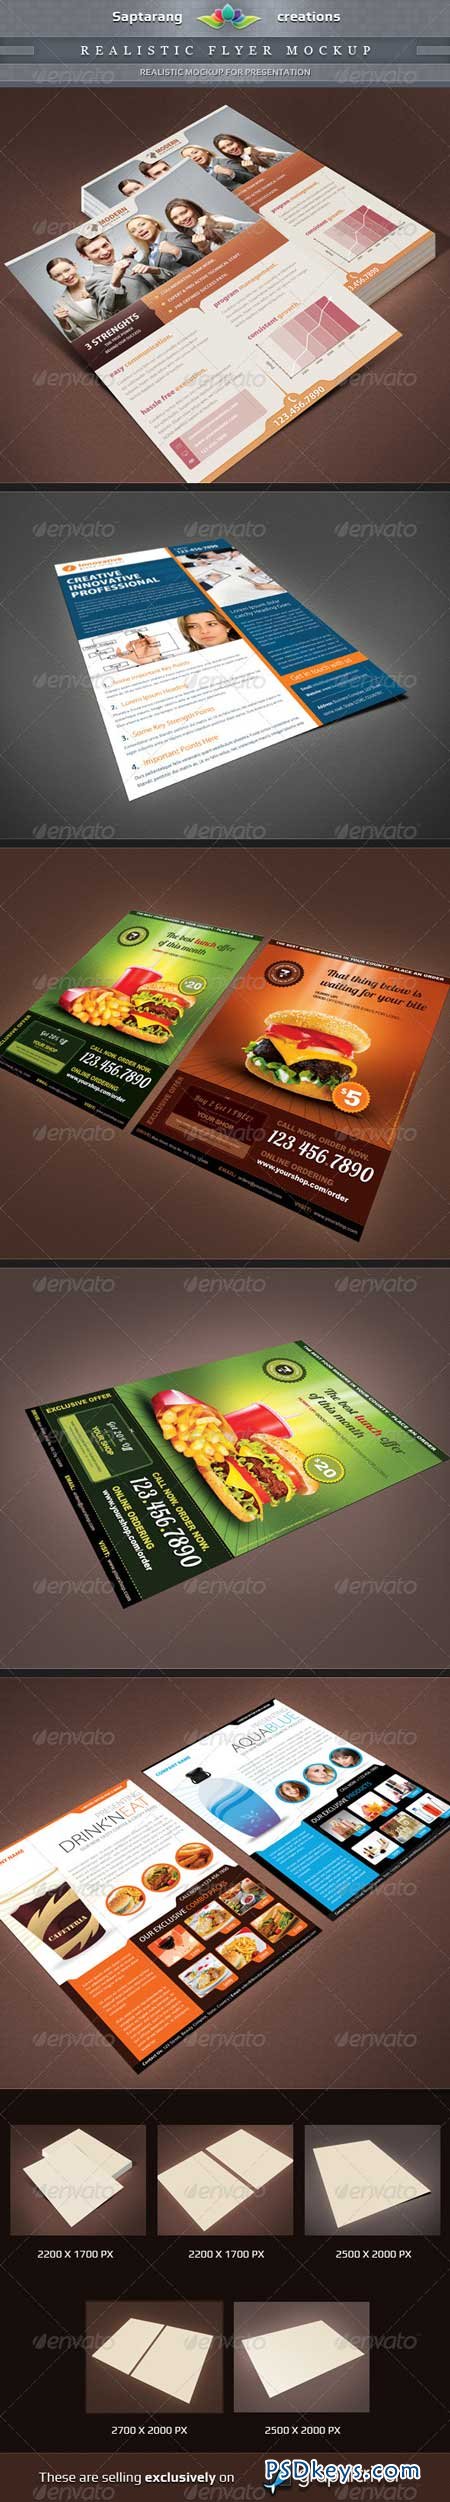 Realistic Flyer Mockup Template 2883602